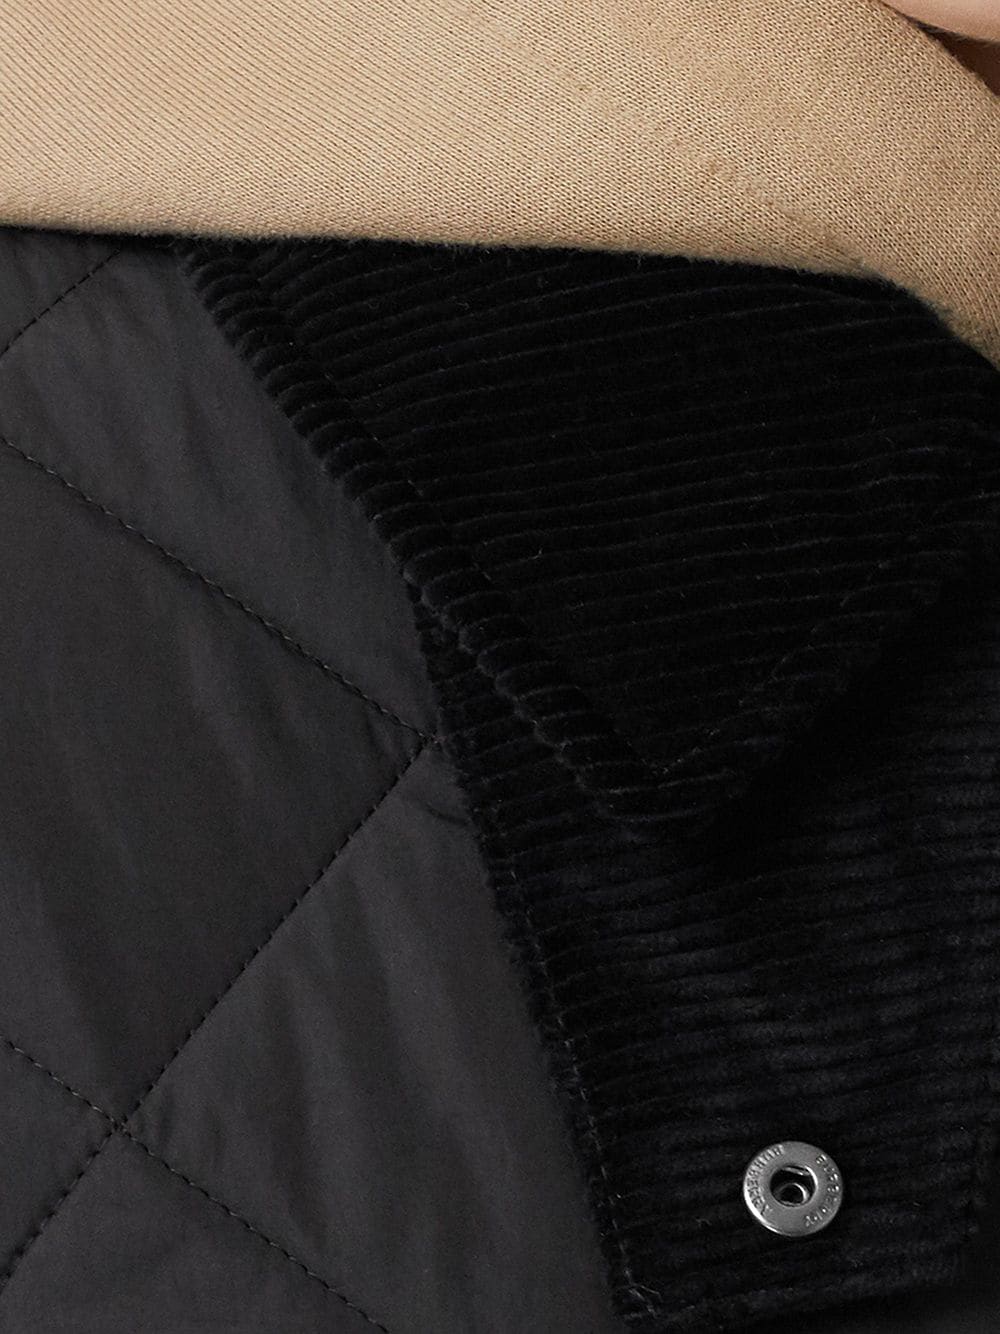 Burberry diamond quilted thermoregulated barn jacket